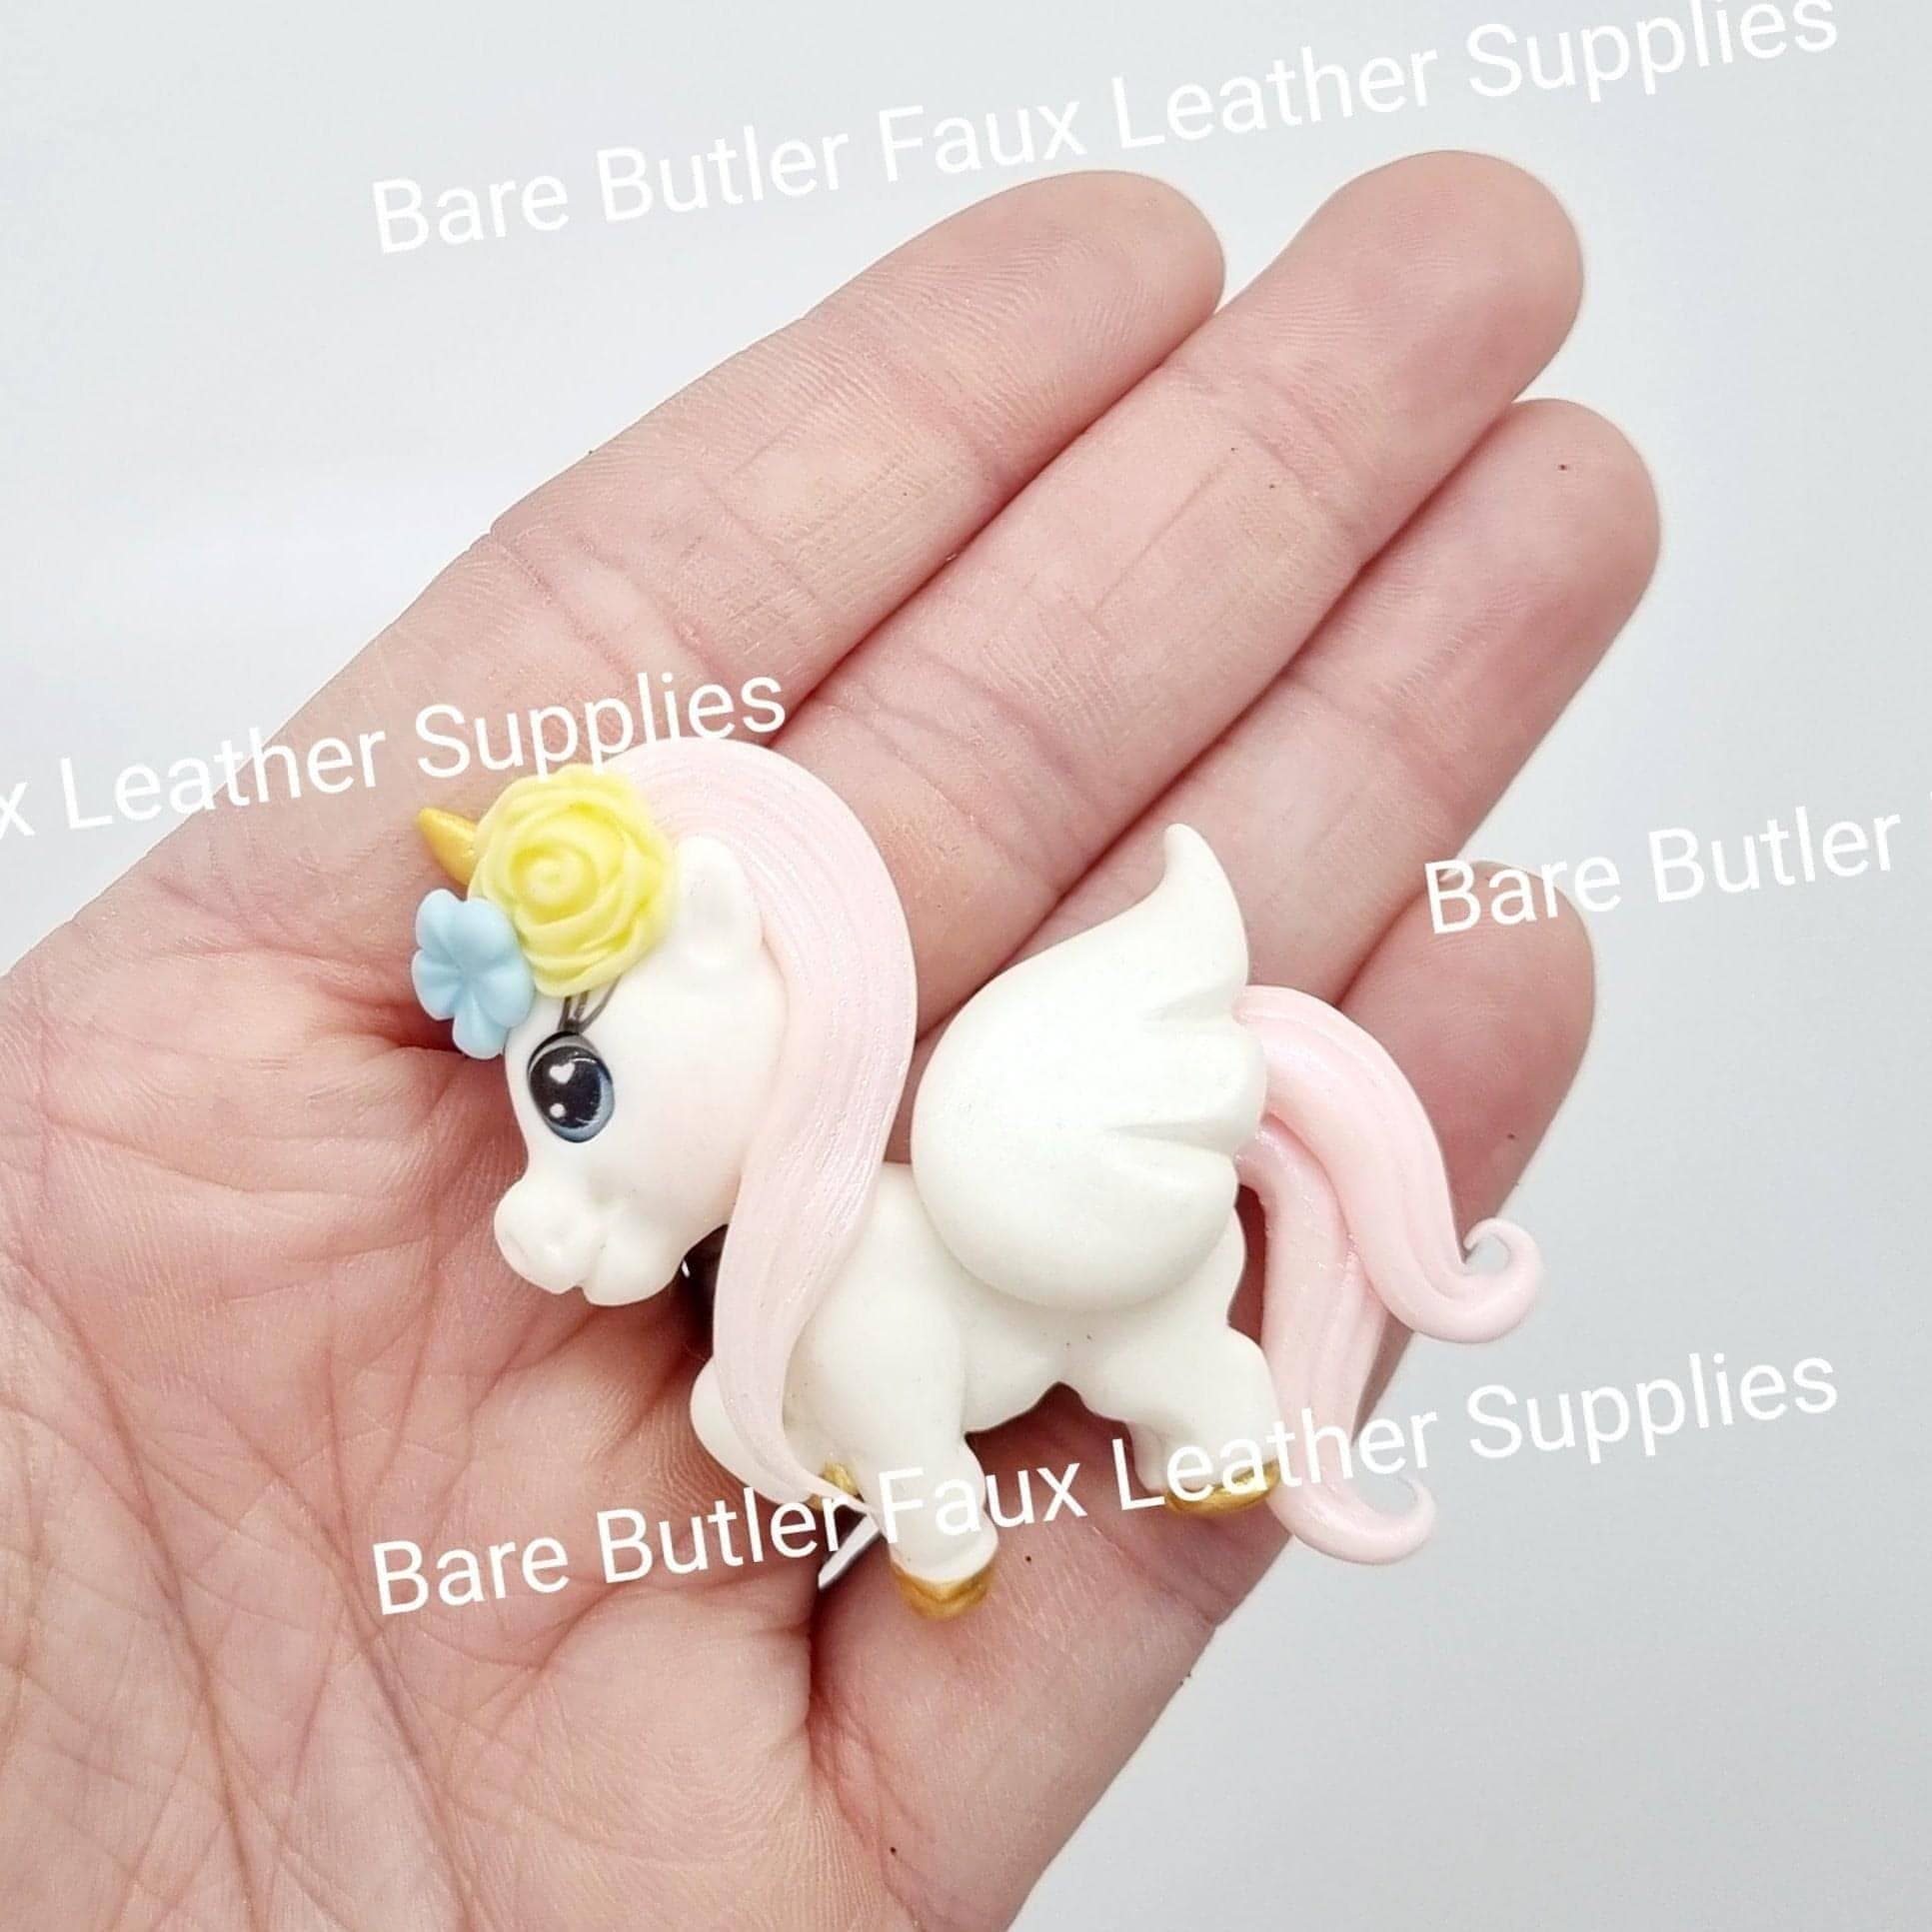 Magical Unicorn - animal, Clay, Clays, Unicorn - Bare Butler Faux Leather Supplies 